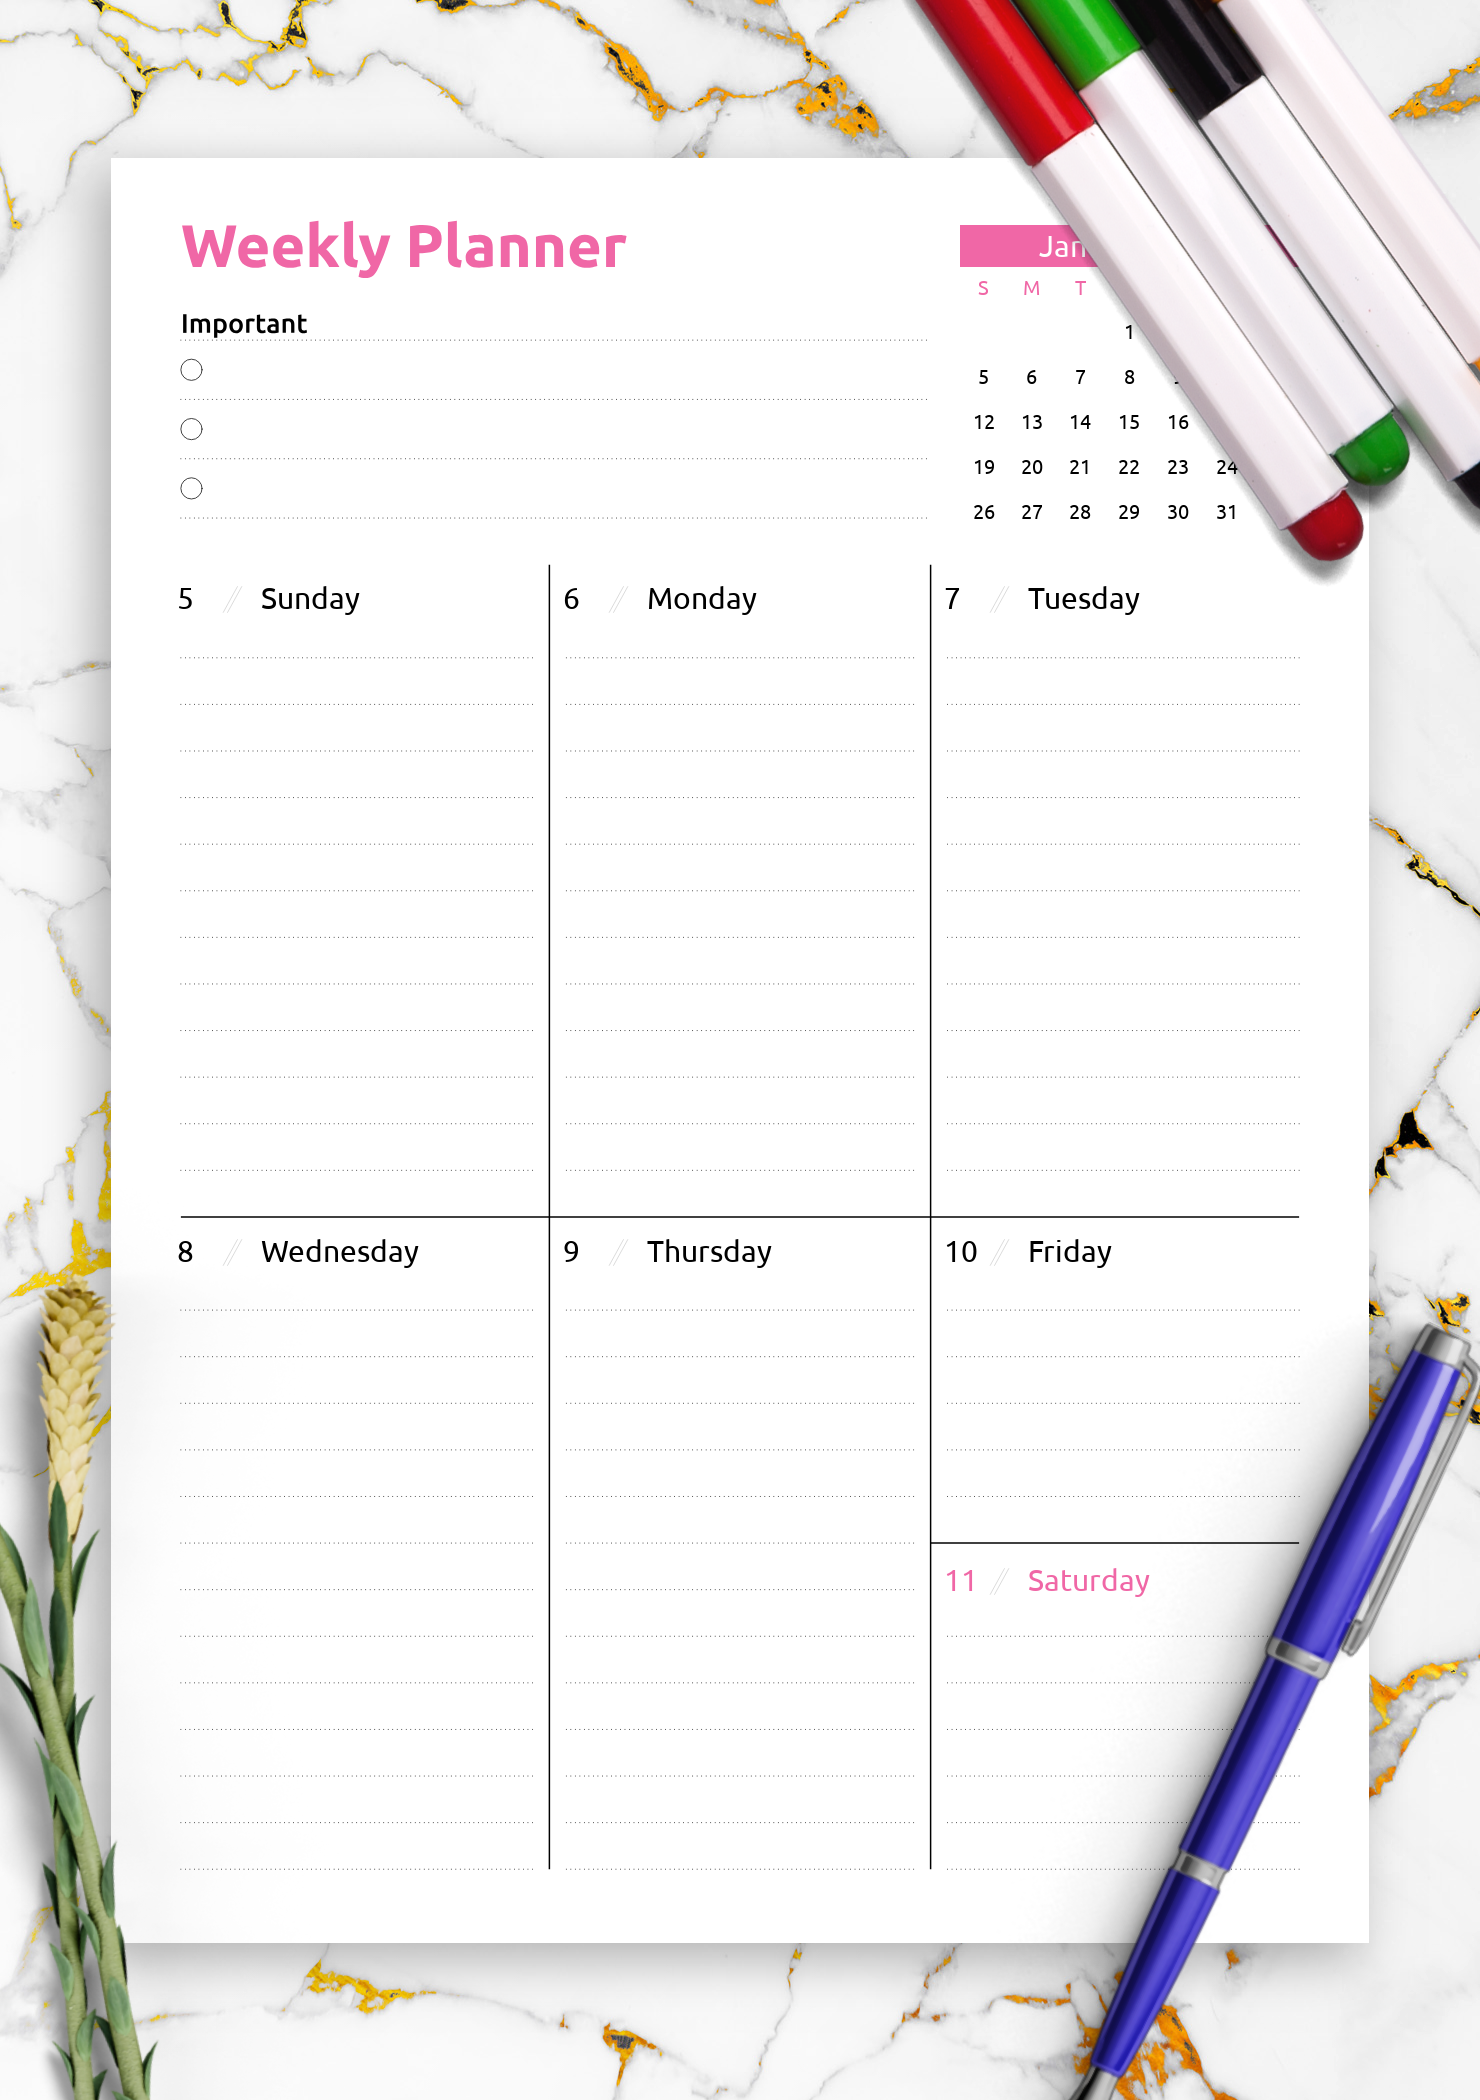 daily-weekly-ms-word-planner-templates-office-templates-online